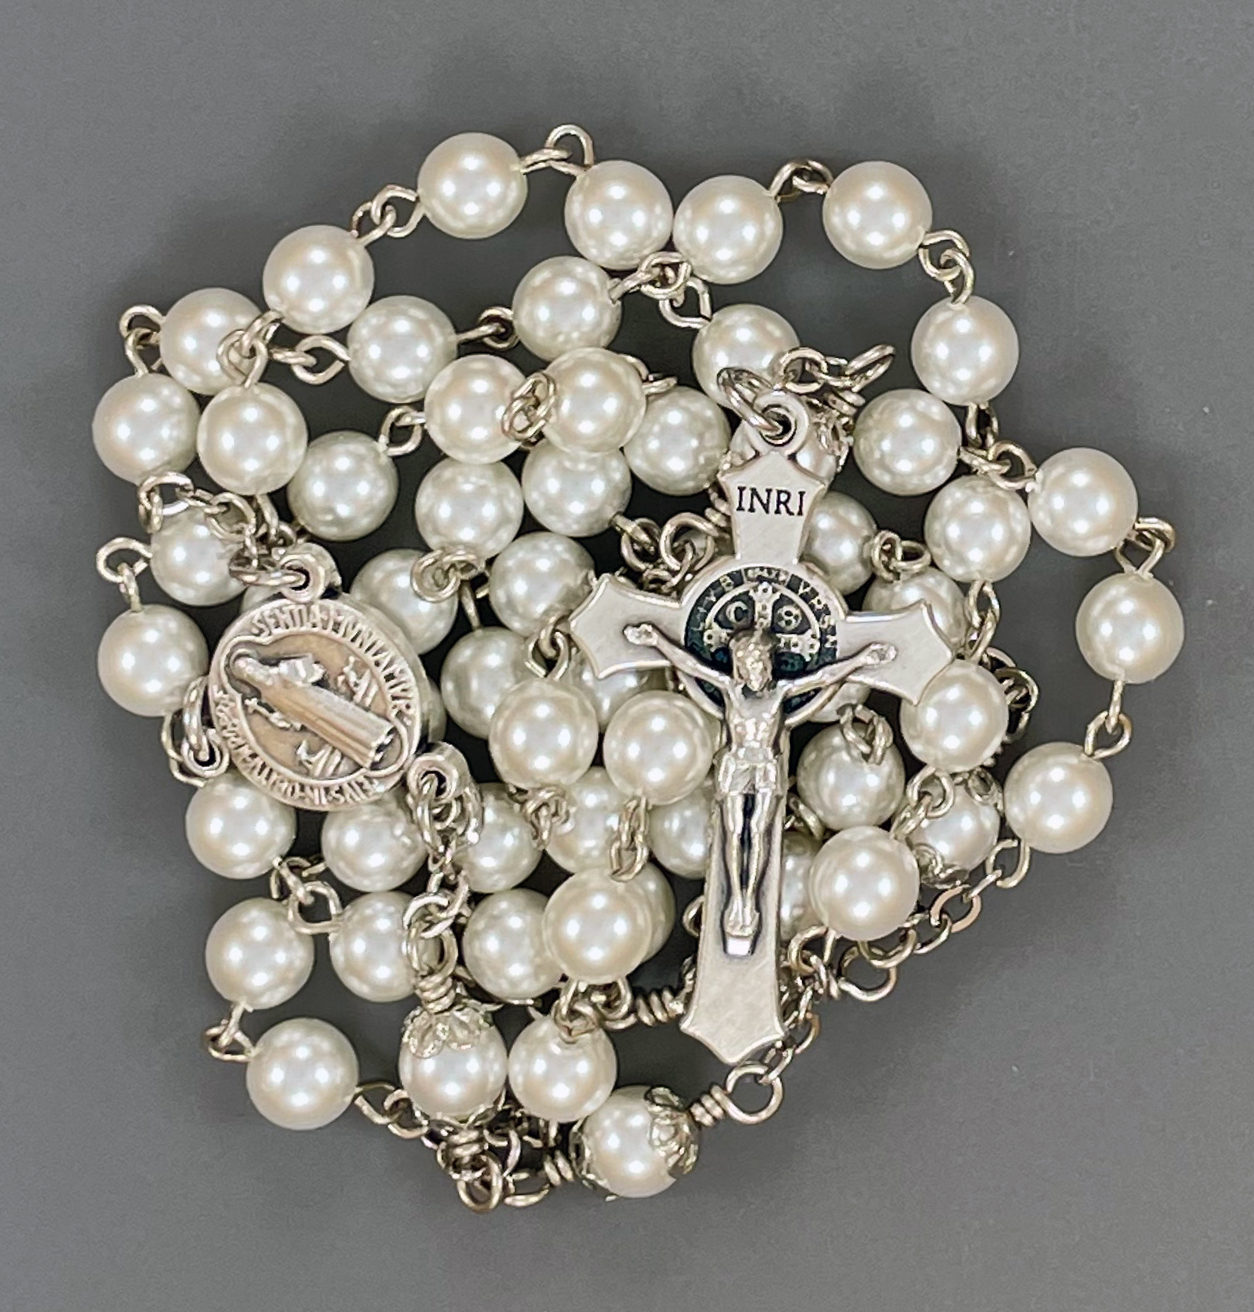 St. Benedict Glass Pearl Rosary ($33.99)